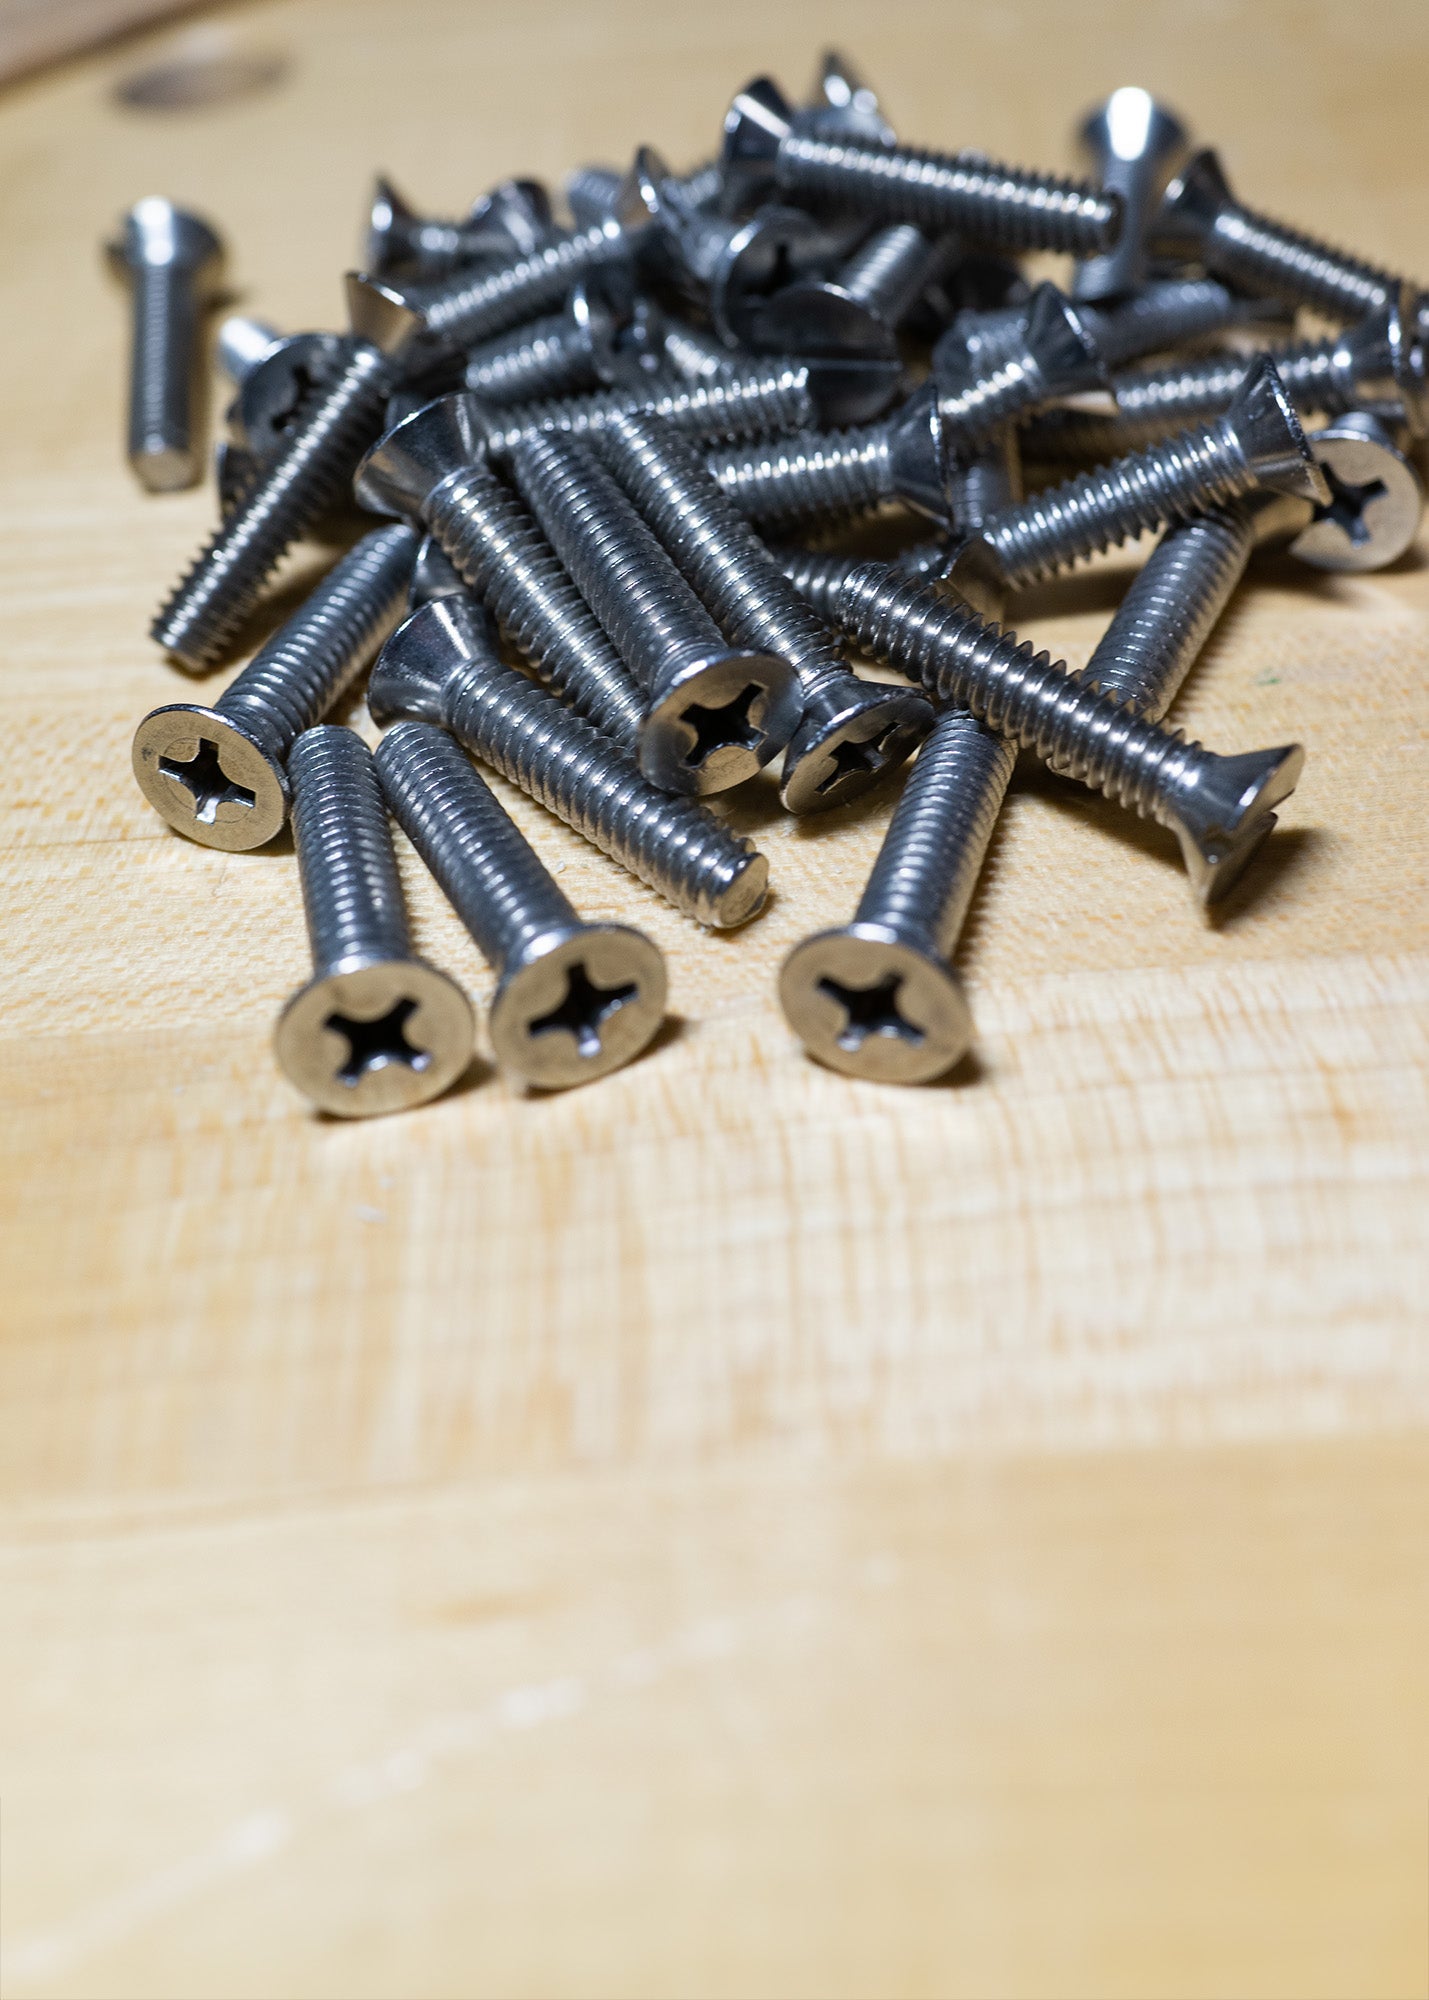 A small pile of stainless steel machine screws